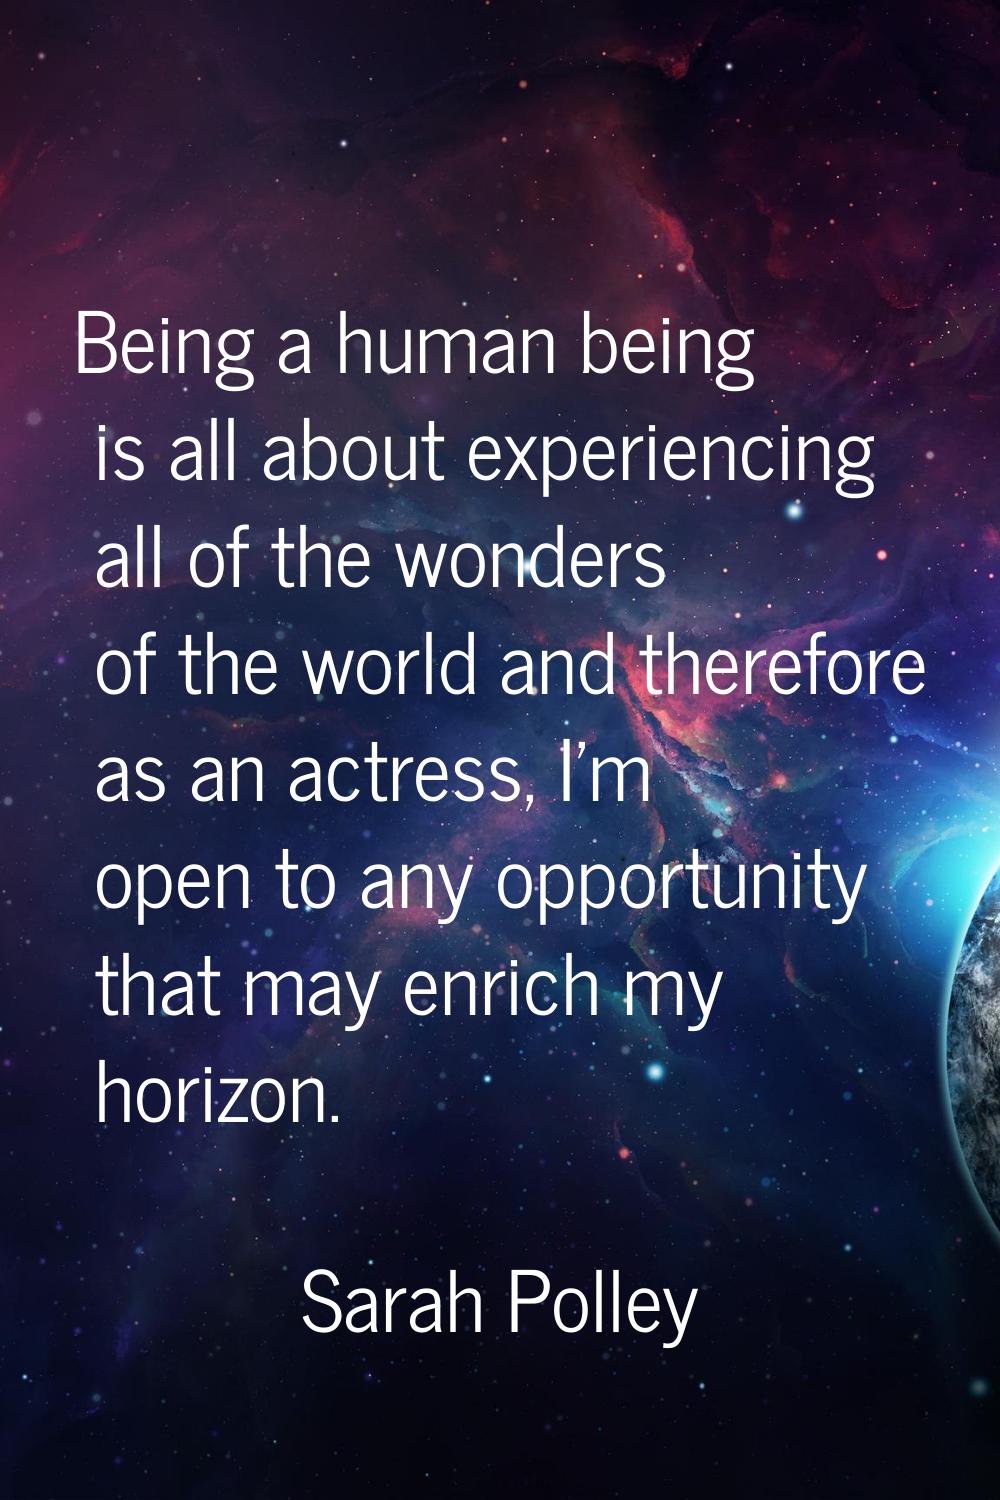 Being a human being is all about experiencing all of the wonders of the world and therefore as an a